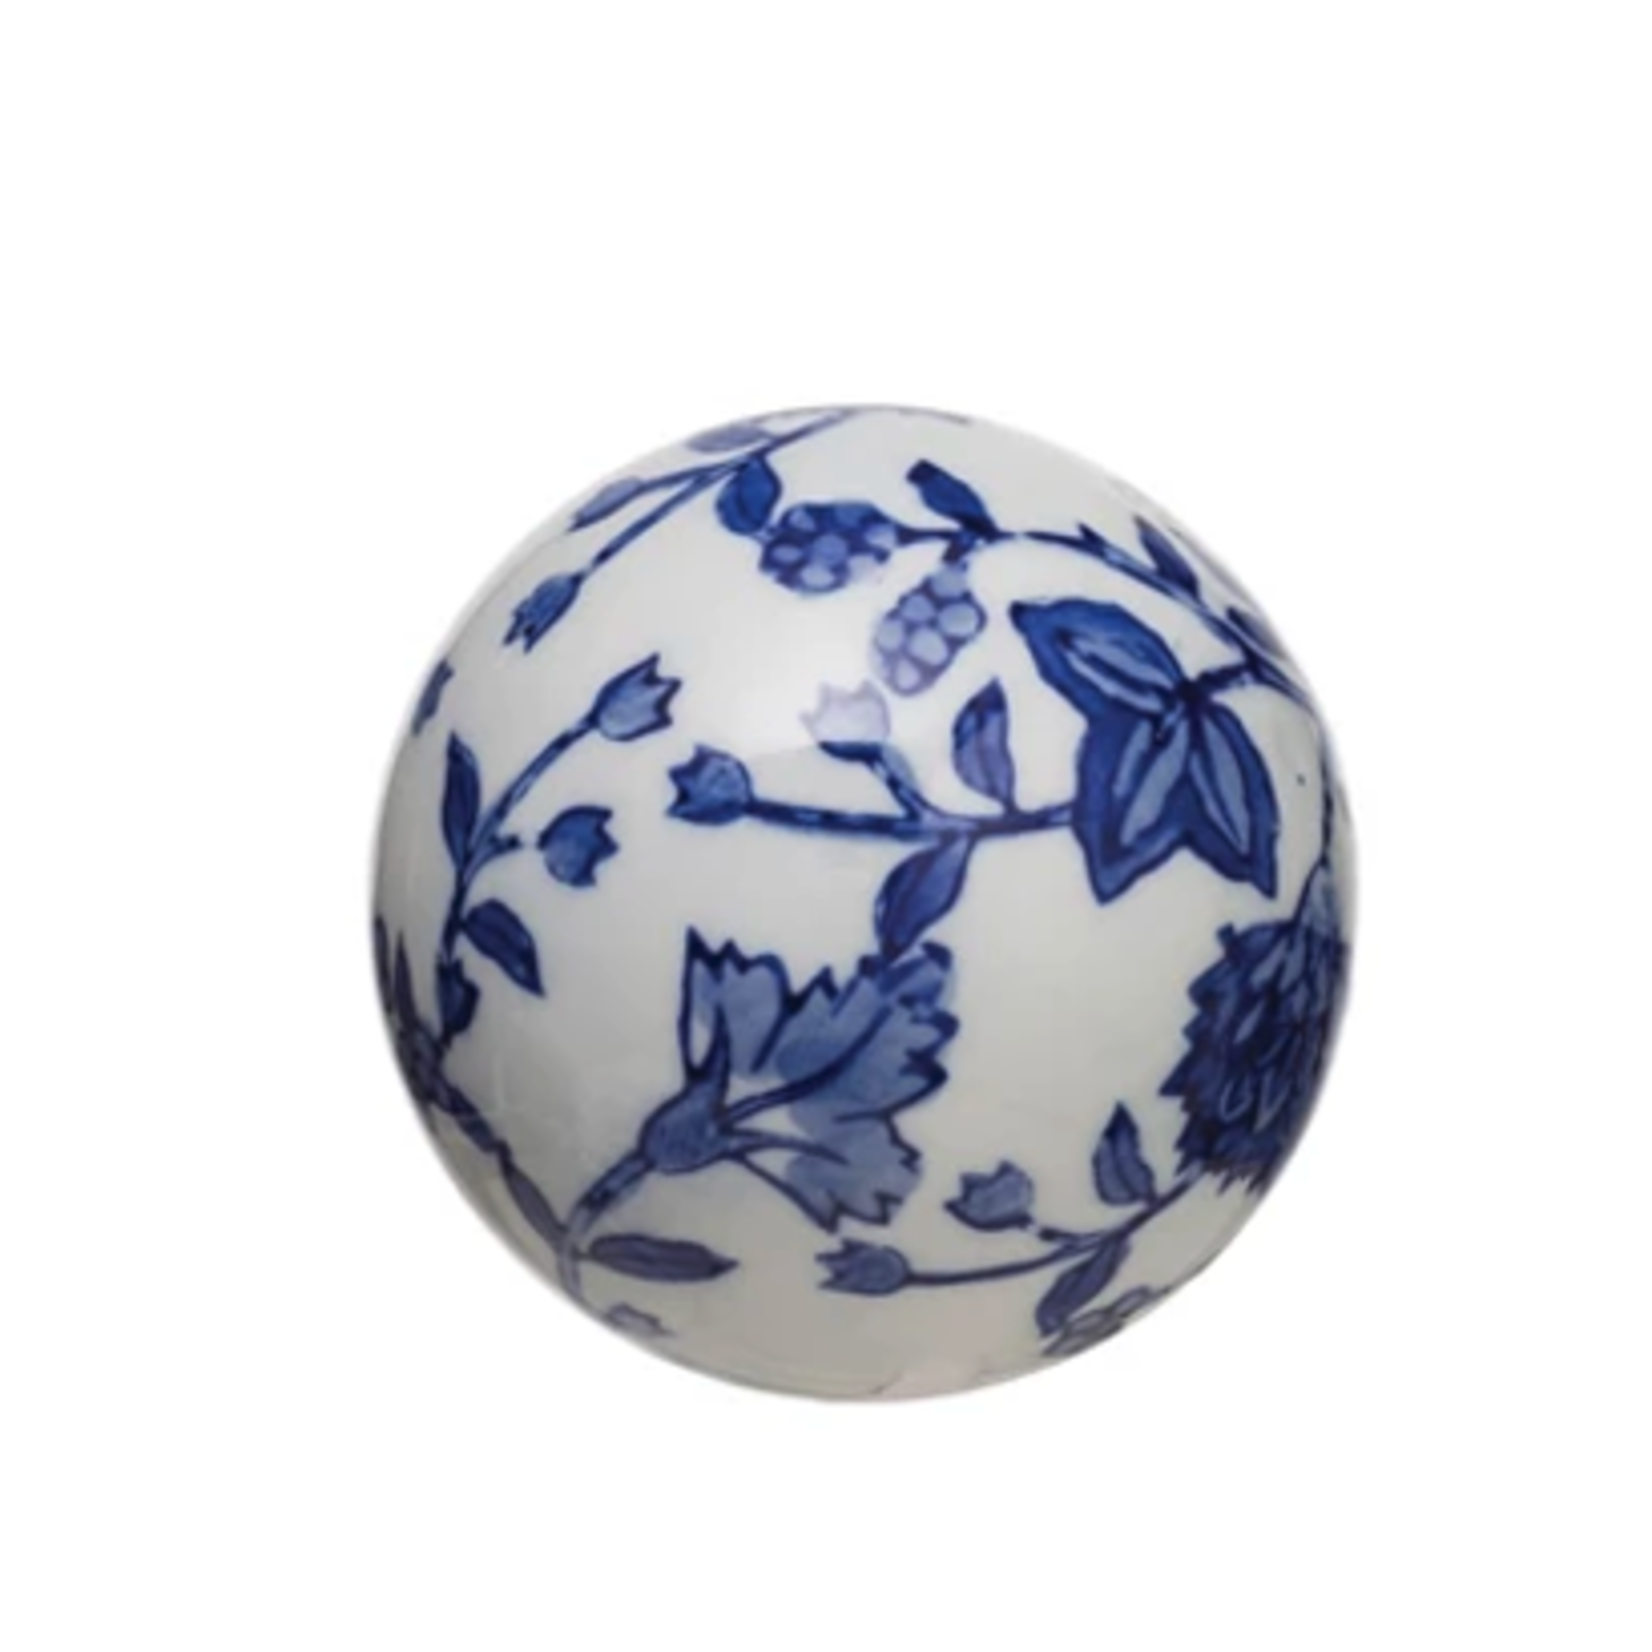 Outside The Box 3" Blue & White Ceramic Decorative Orb - SOLD SEPARATELY